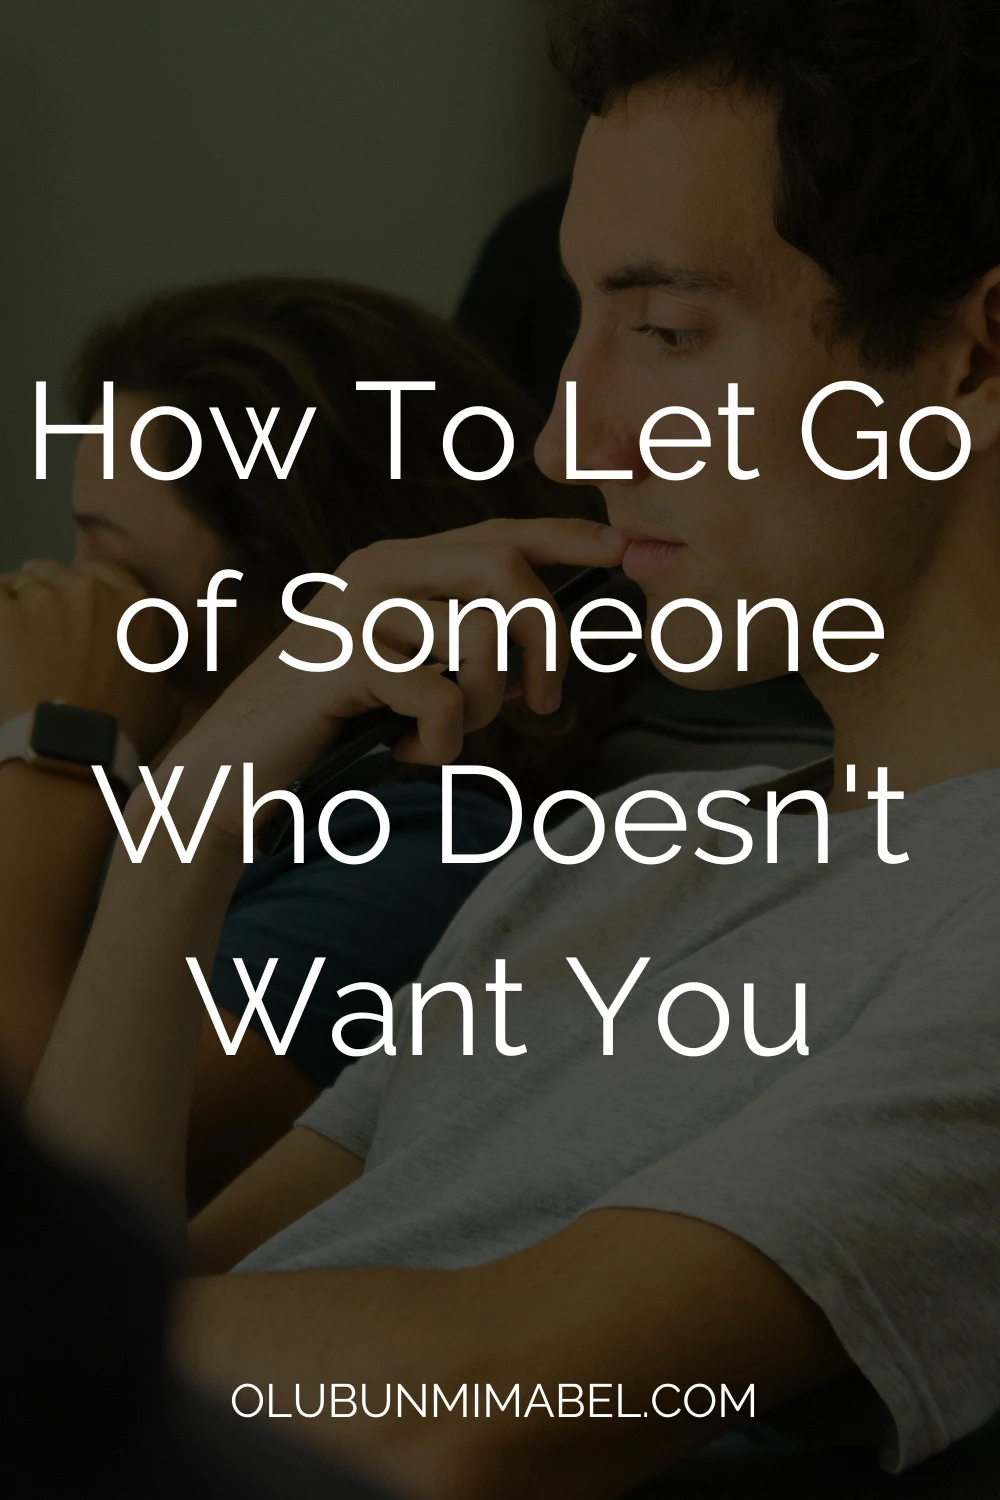 How To Let Go of Someone Who Doesn't Want You